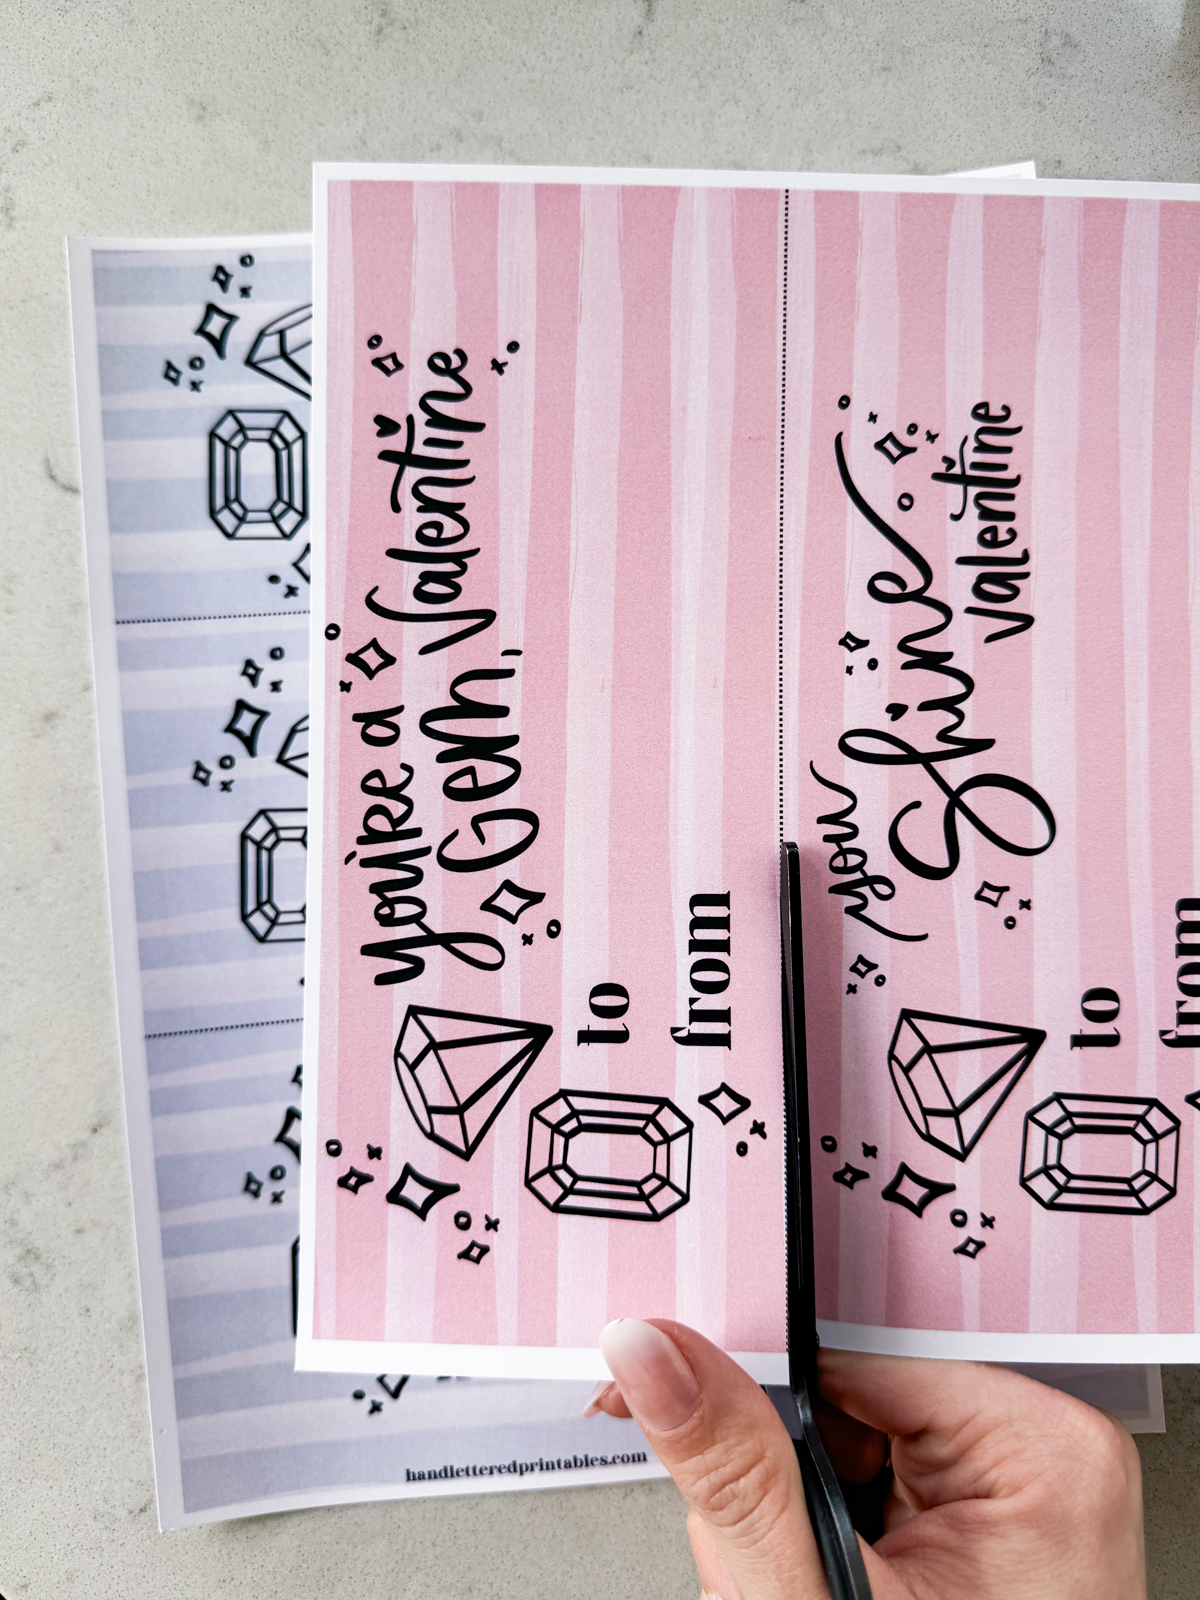 image of printed valentines with a gem theme, designed to pair with ring pops. printed and being cut to size on a marble counter shown hand lettered valentines in both pink and purple read:' you're a gem, valentine', 'you shine, valentine', and 'have a poppin' valentine's day'